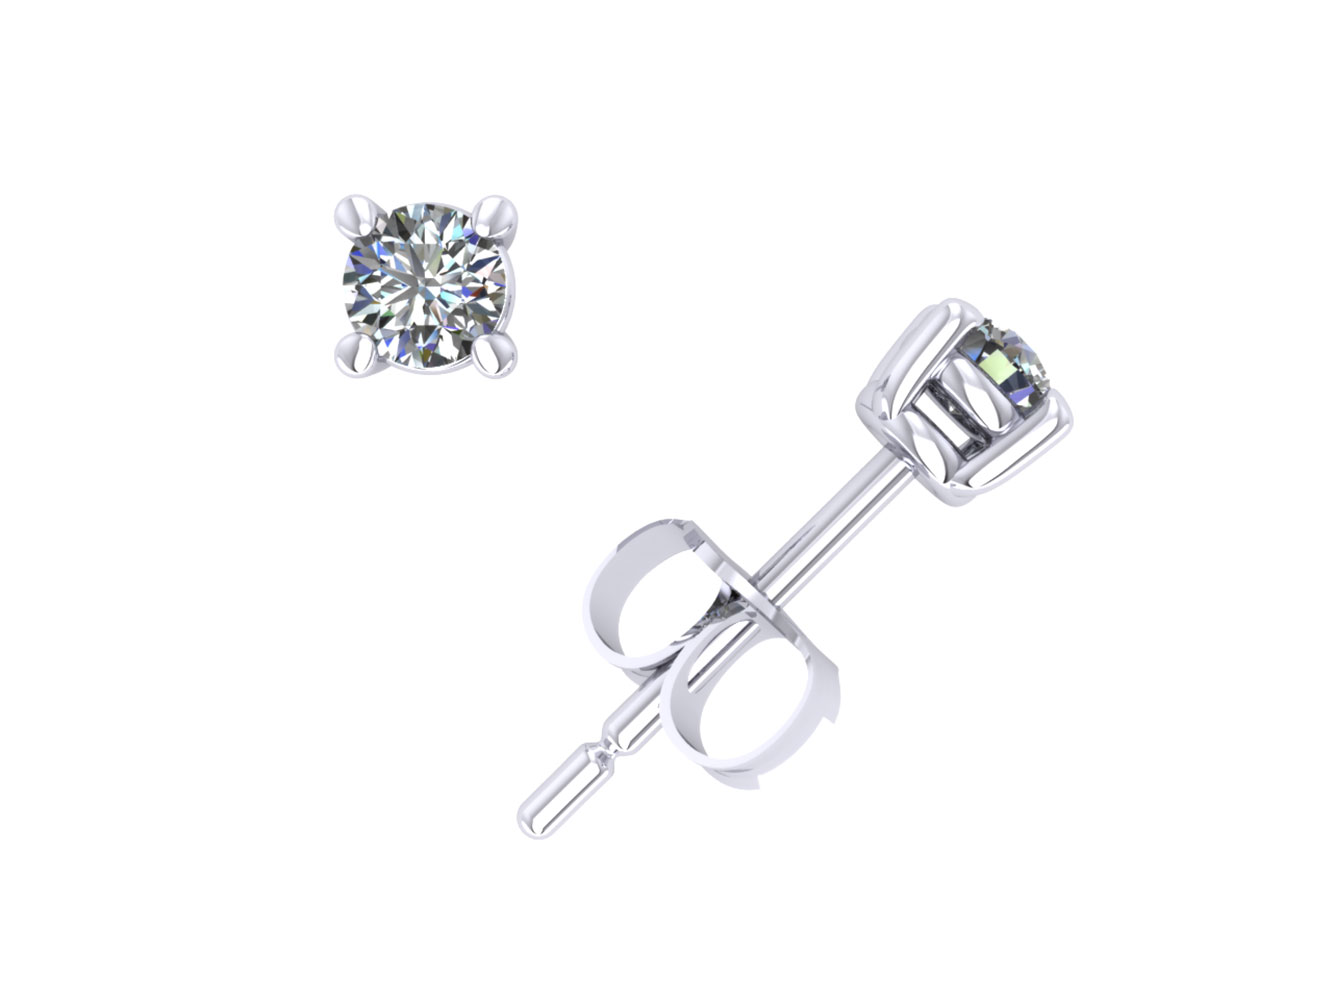 Jewel We Sell 1/4Ct Round Diamond Basket Solitaire Stud Earrings 10k White or Yellow Gold Prong E VS1